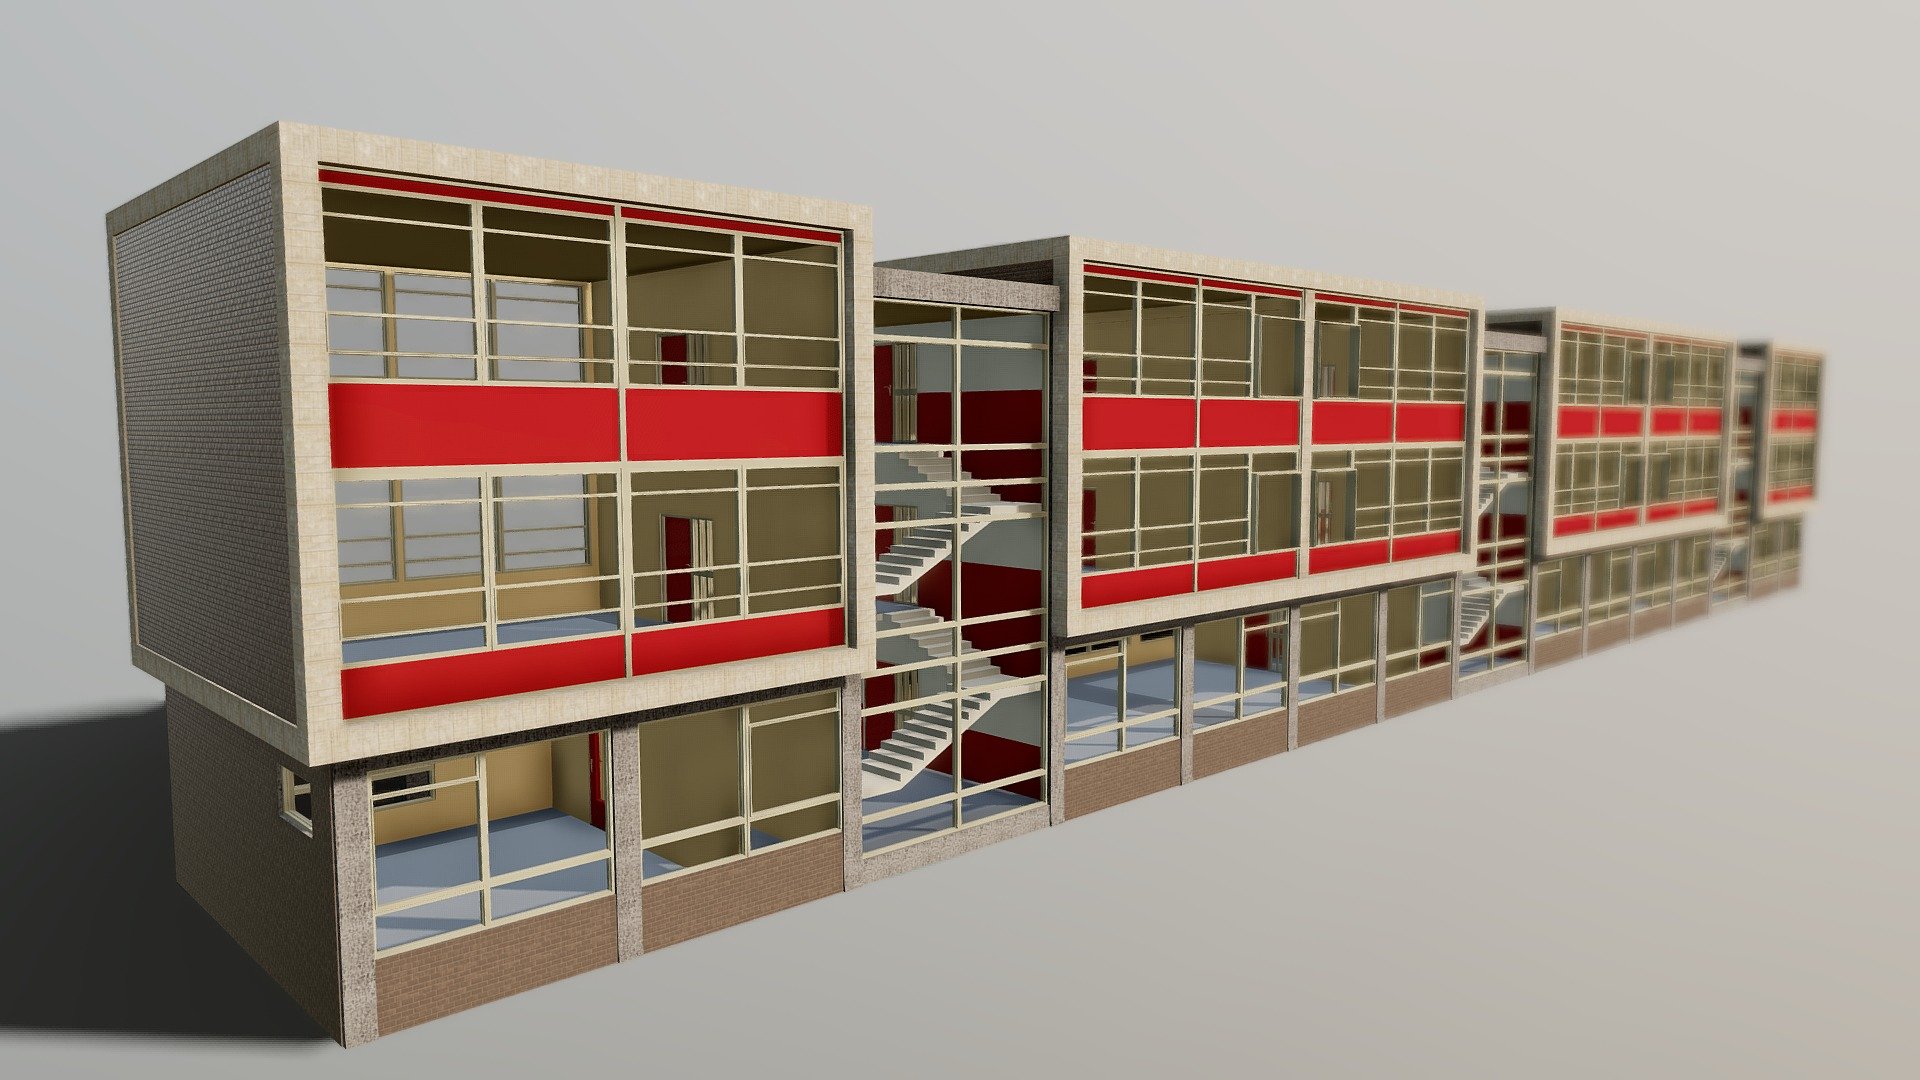 One of my older models, was experimenting with Unreal Engine and trying to build modular real school based on Walse Louise Coligny.
UV's are world scaled and componentes are seperated for better light baking resolution.
WIP - 1950 School building Low Poly - 3D model by Geug 3d model